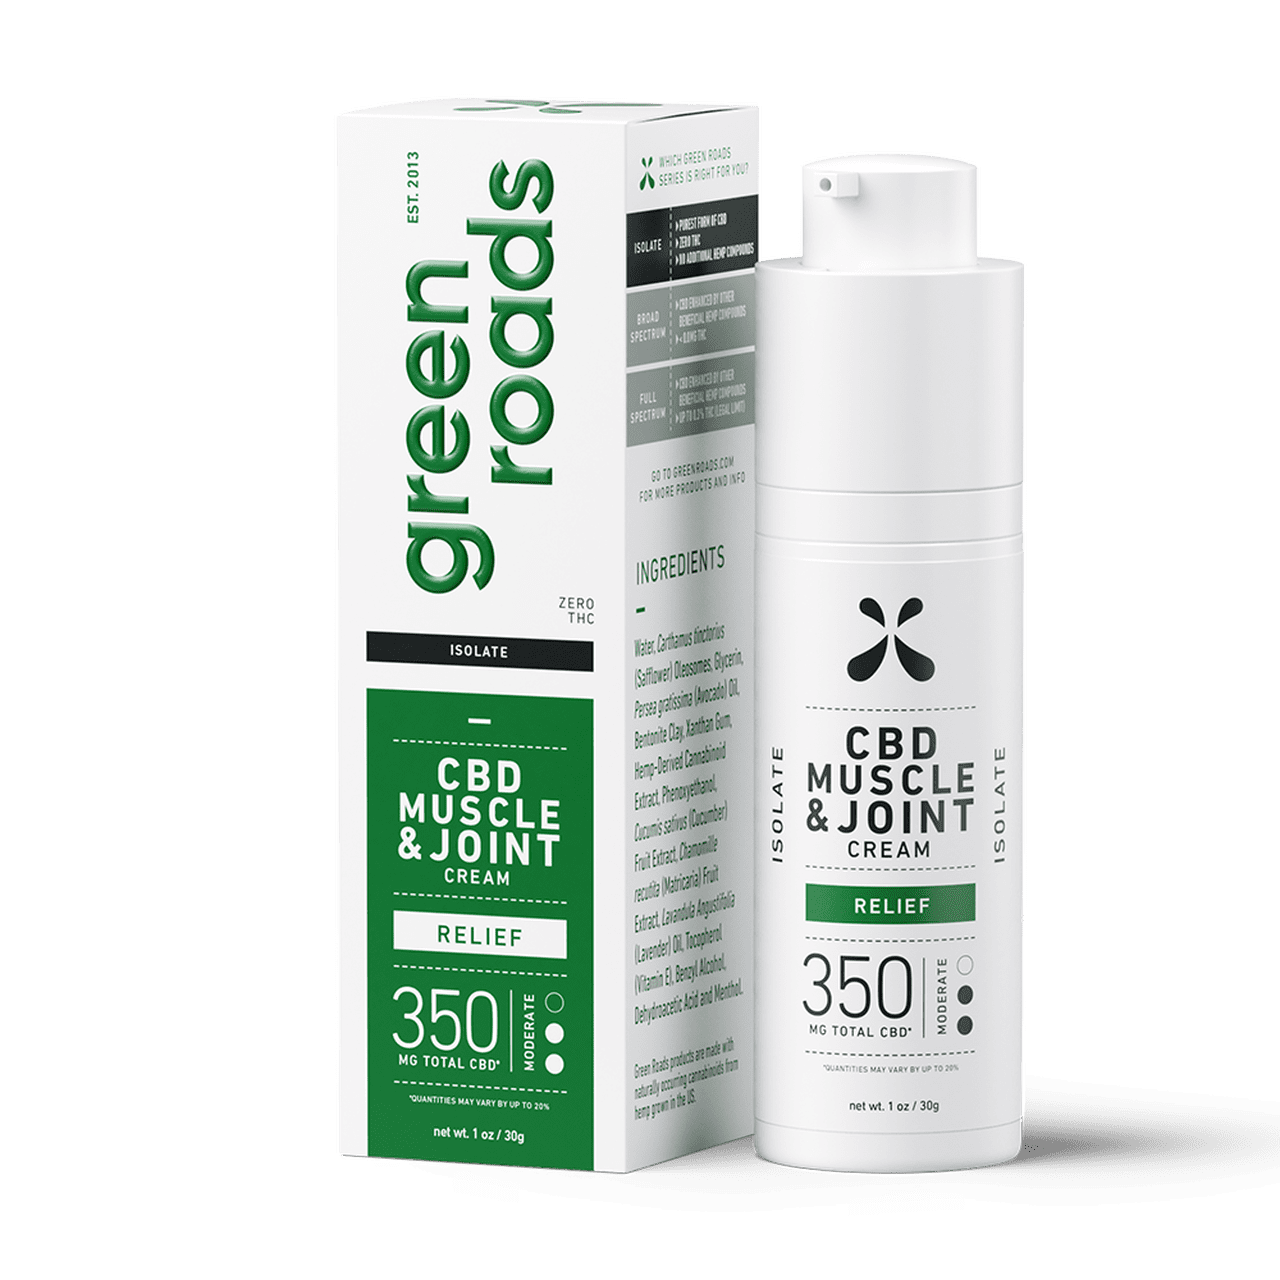 Green Roads Muscle & Joint Relief CBD Cream